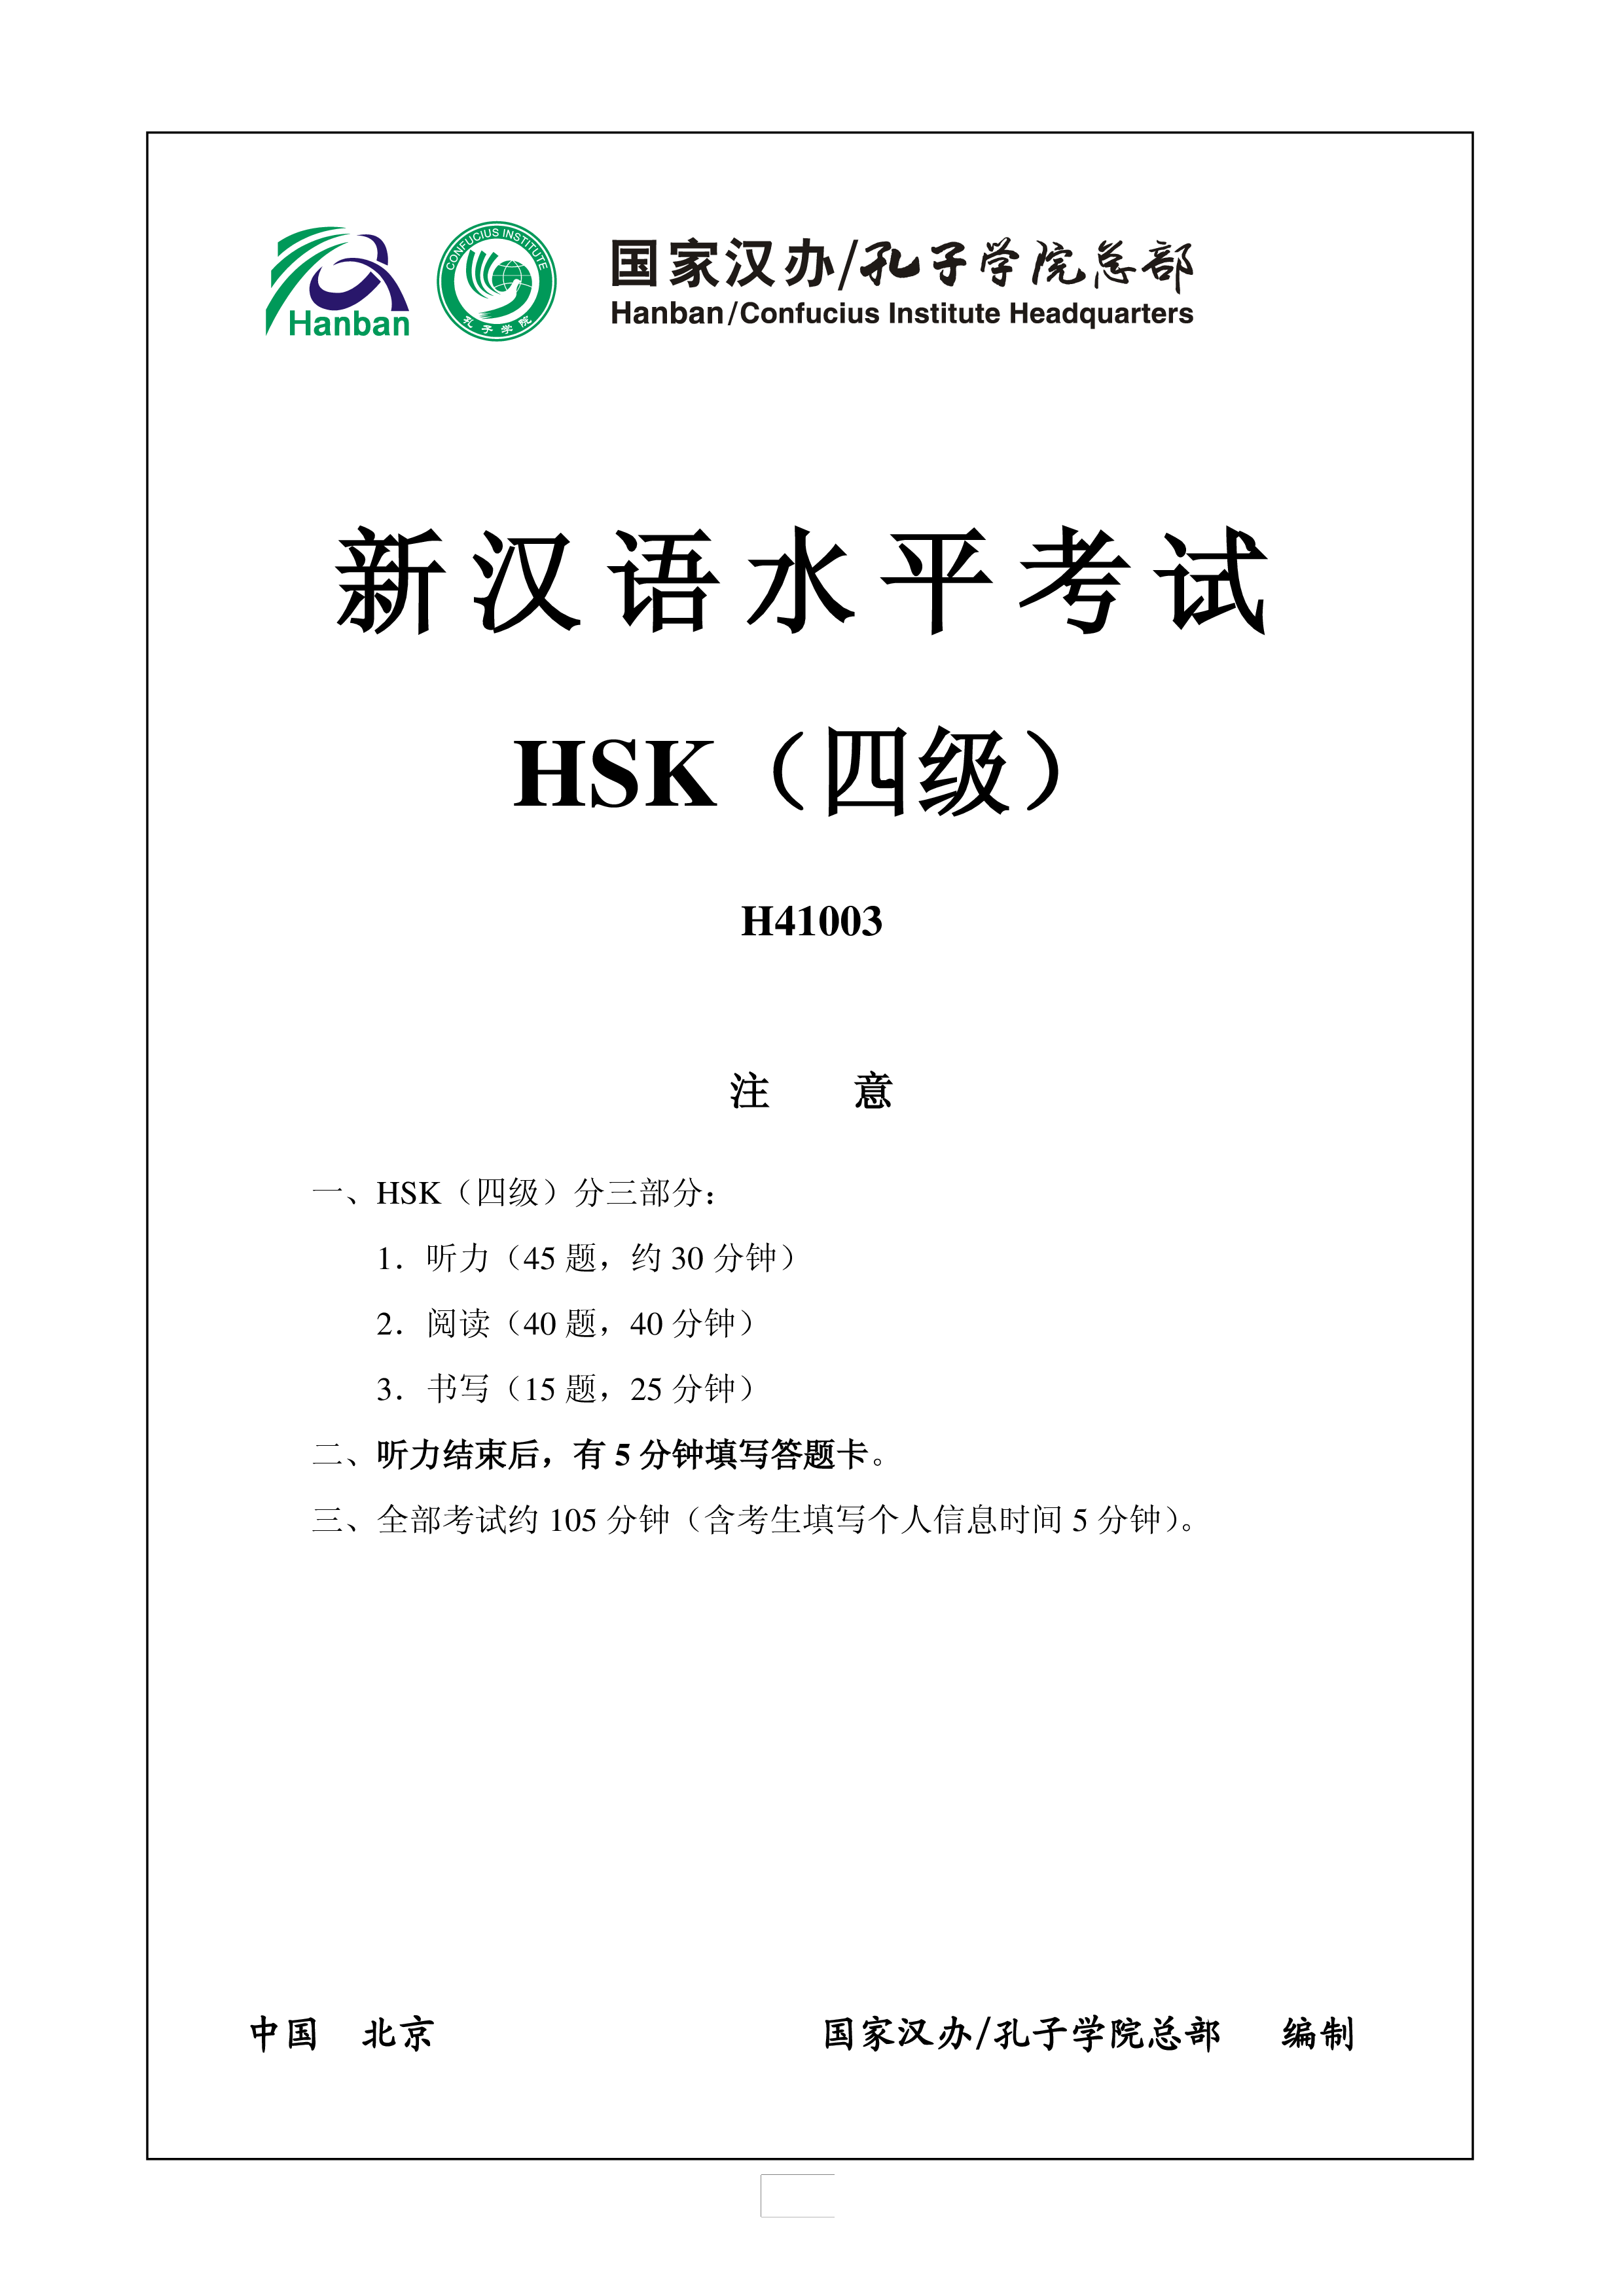 HSK4 Chinese Exam including Answers # HSK H41003 main image